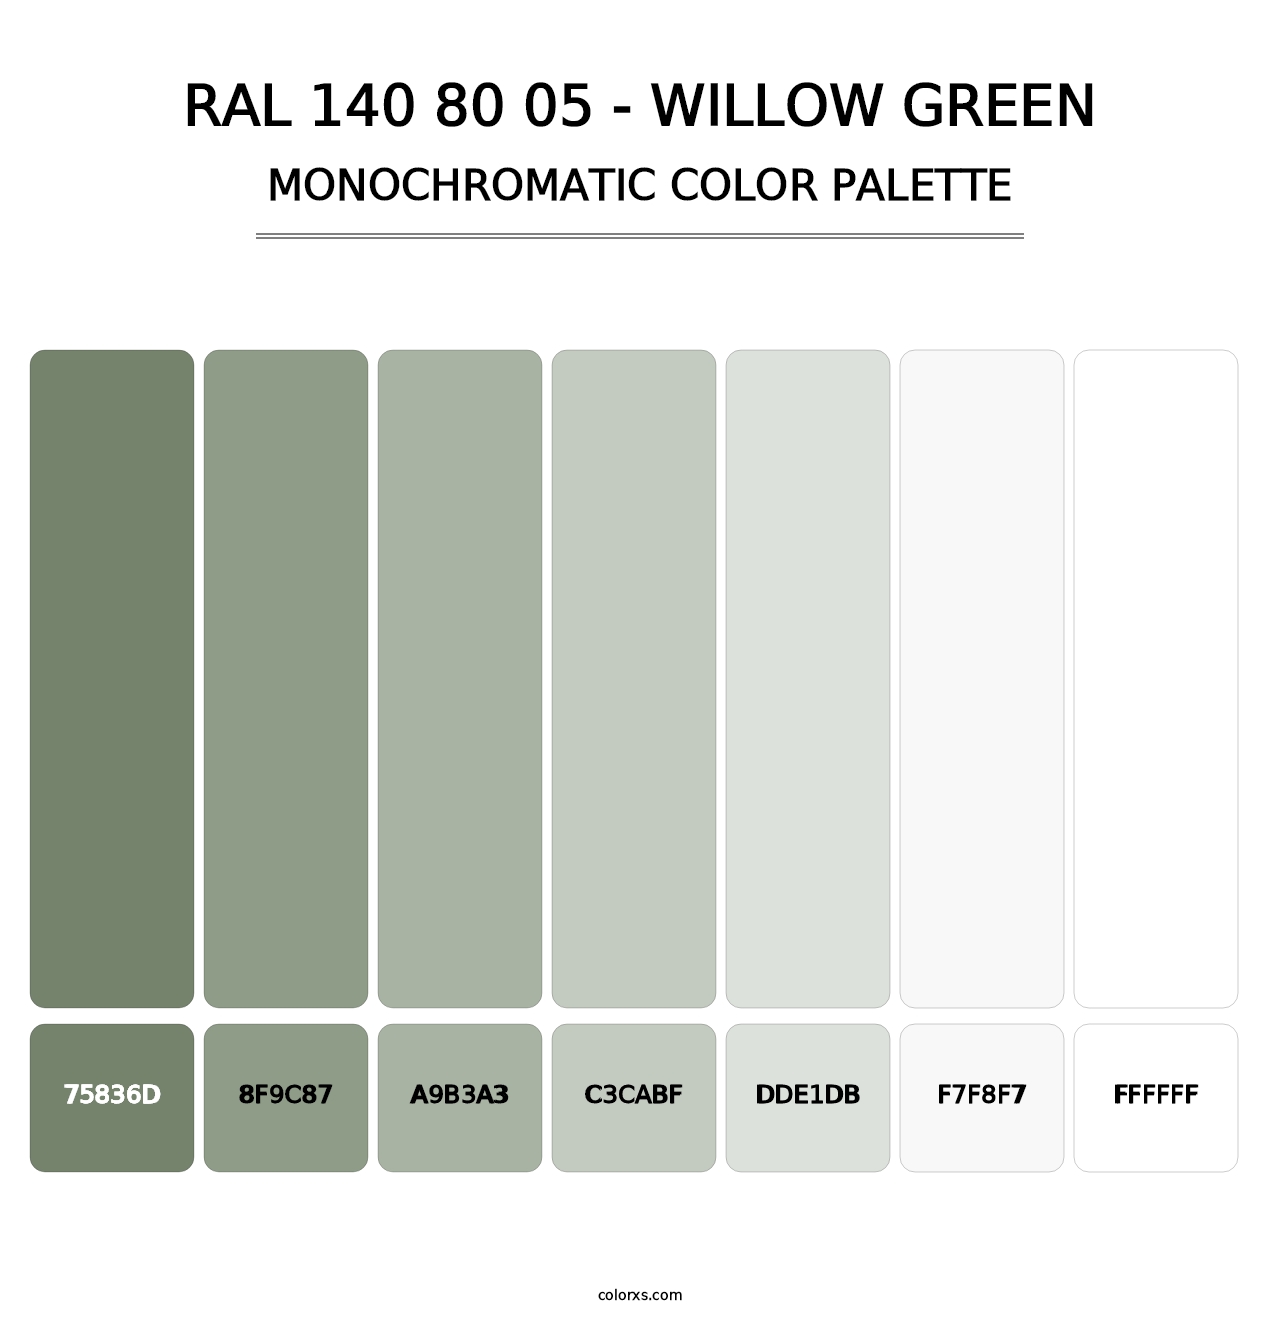 RAL 140 80 05 - Willow Green - Monochromatic Color Palette